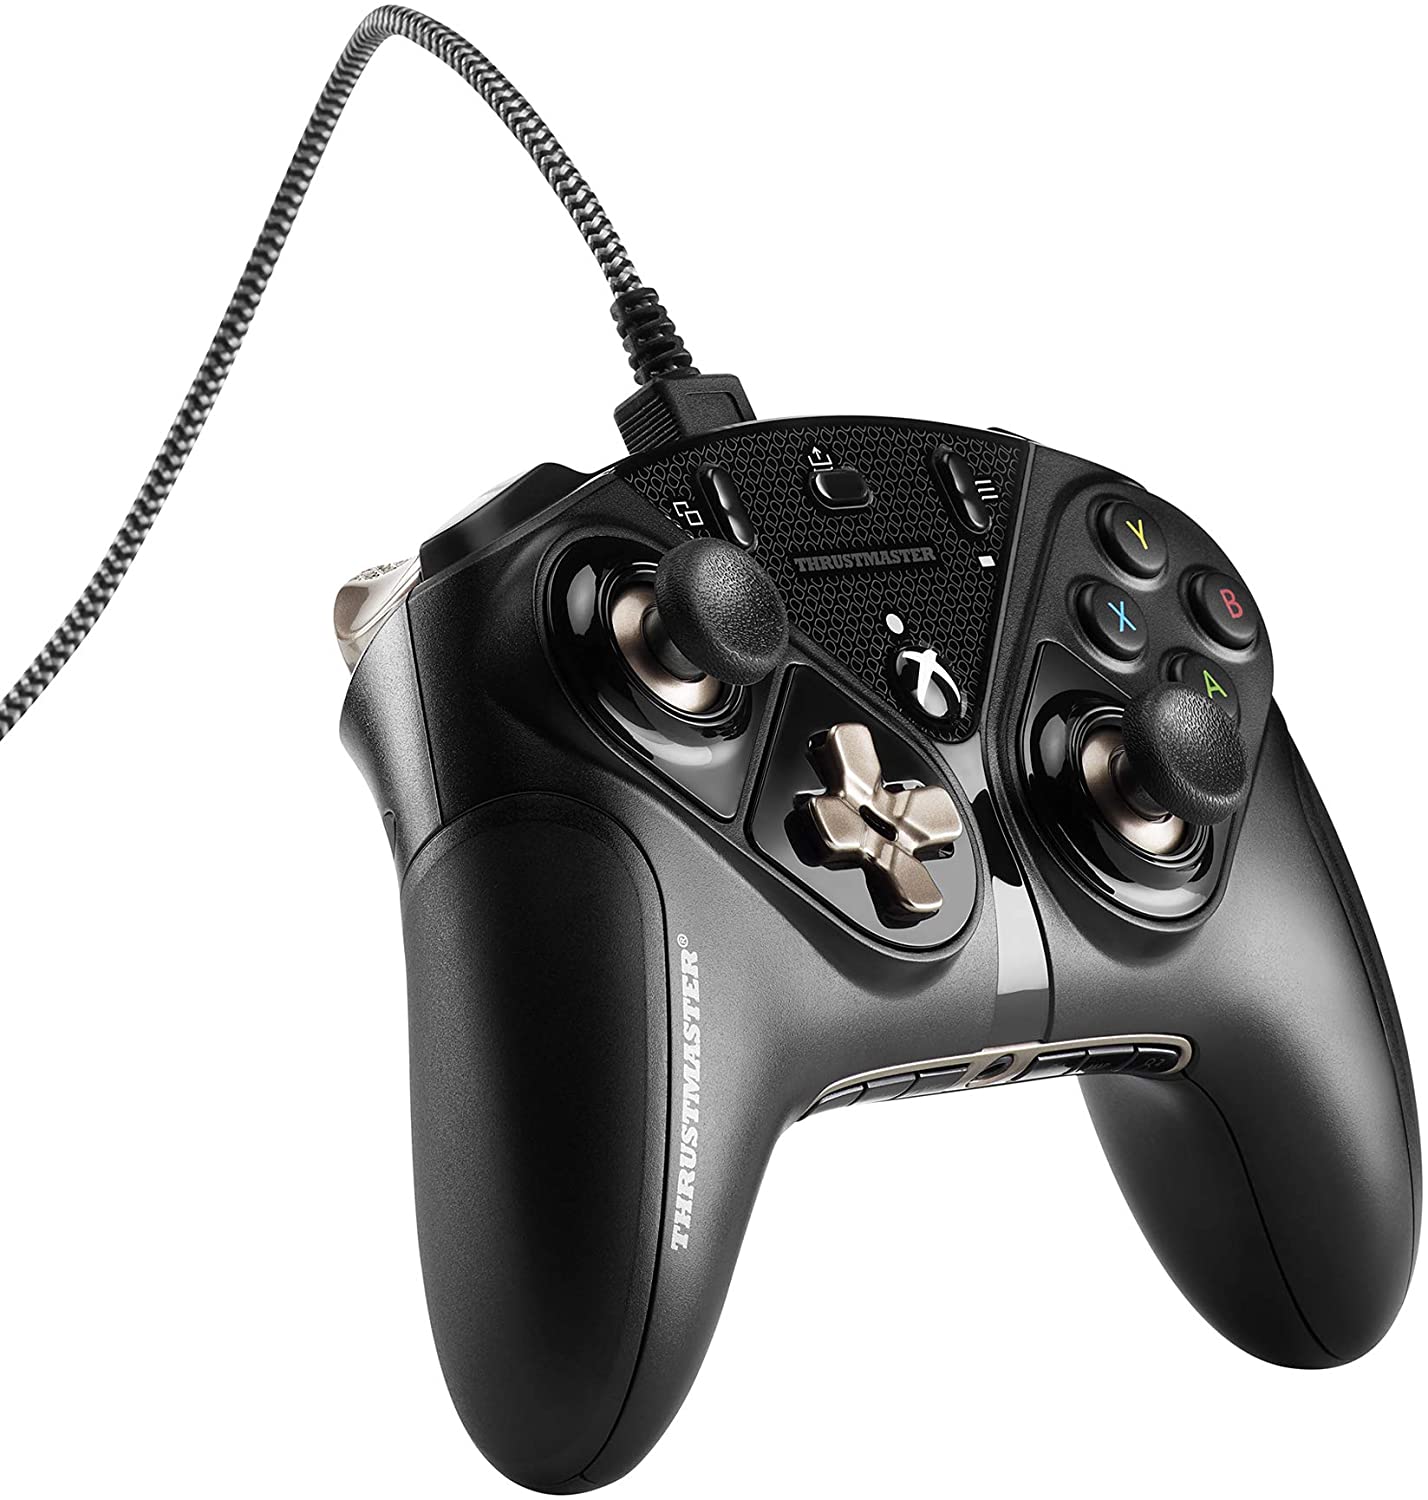 Thrustmaster eSwap X Pro Wired Controller for Xbox Series X|S / Xbox One / PC - Refurbished